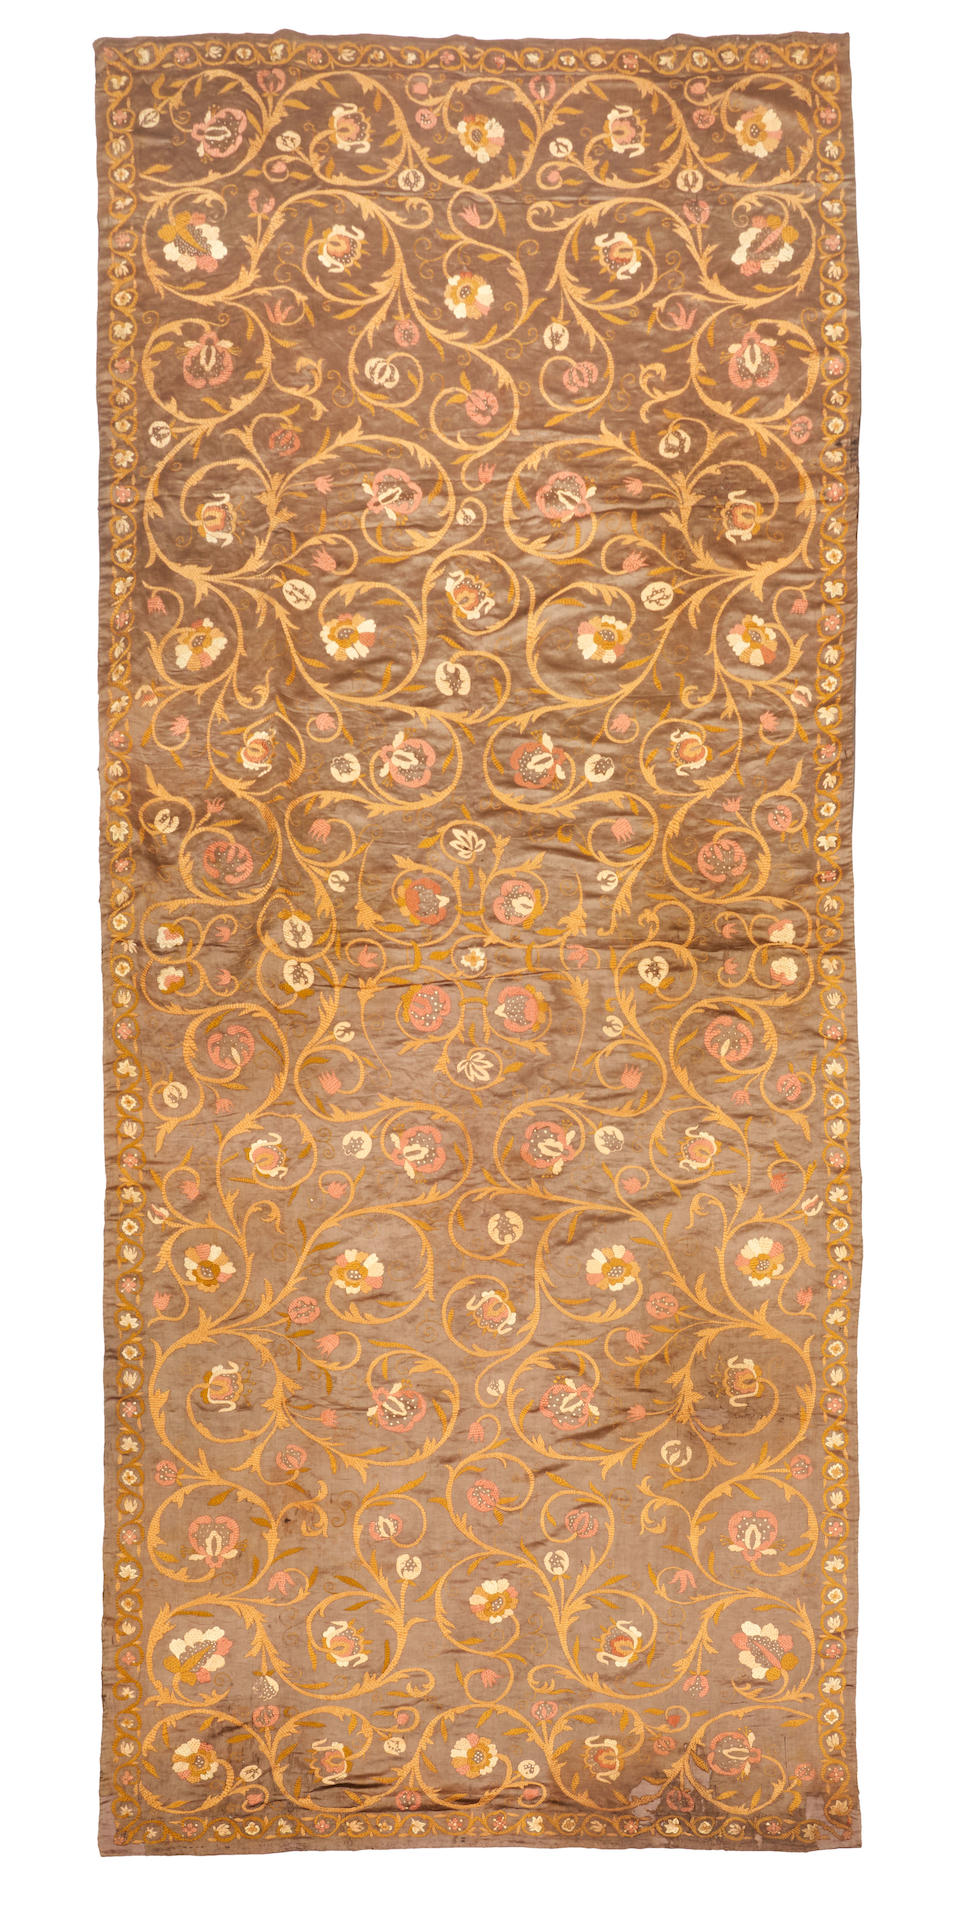 Turkish Silk Embroidered Panel Anatolia 9 ft. 4 in. x 4 ft.